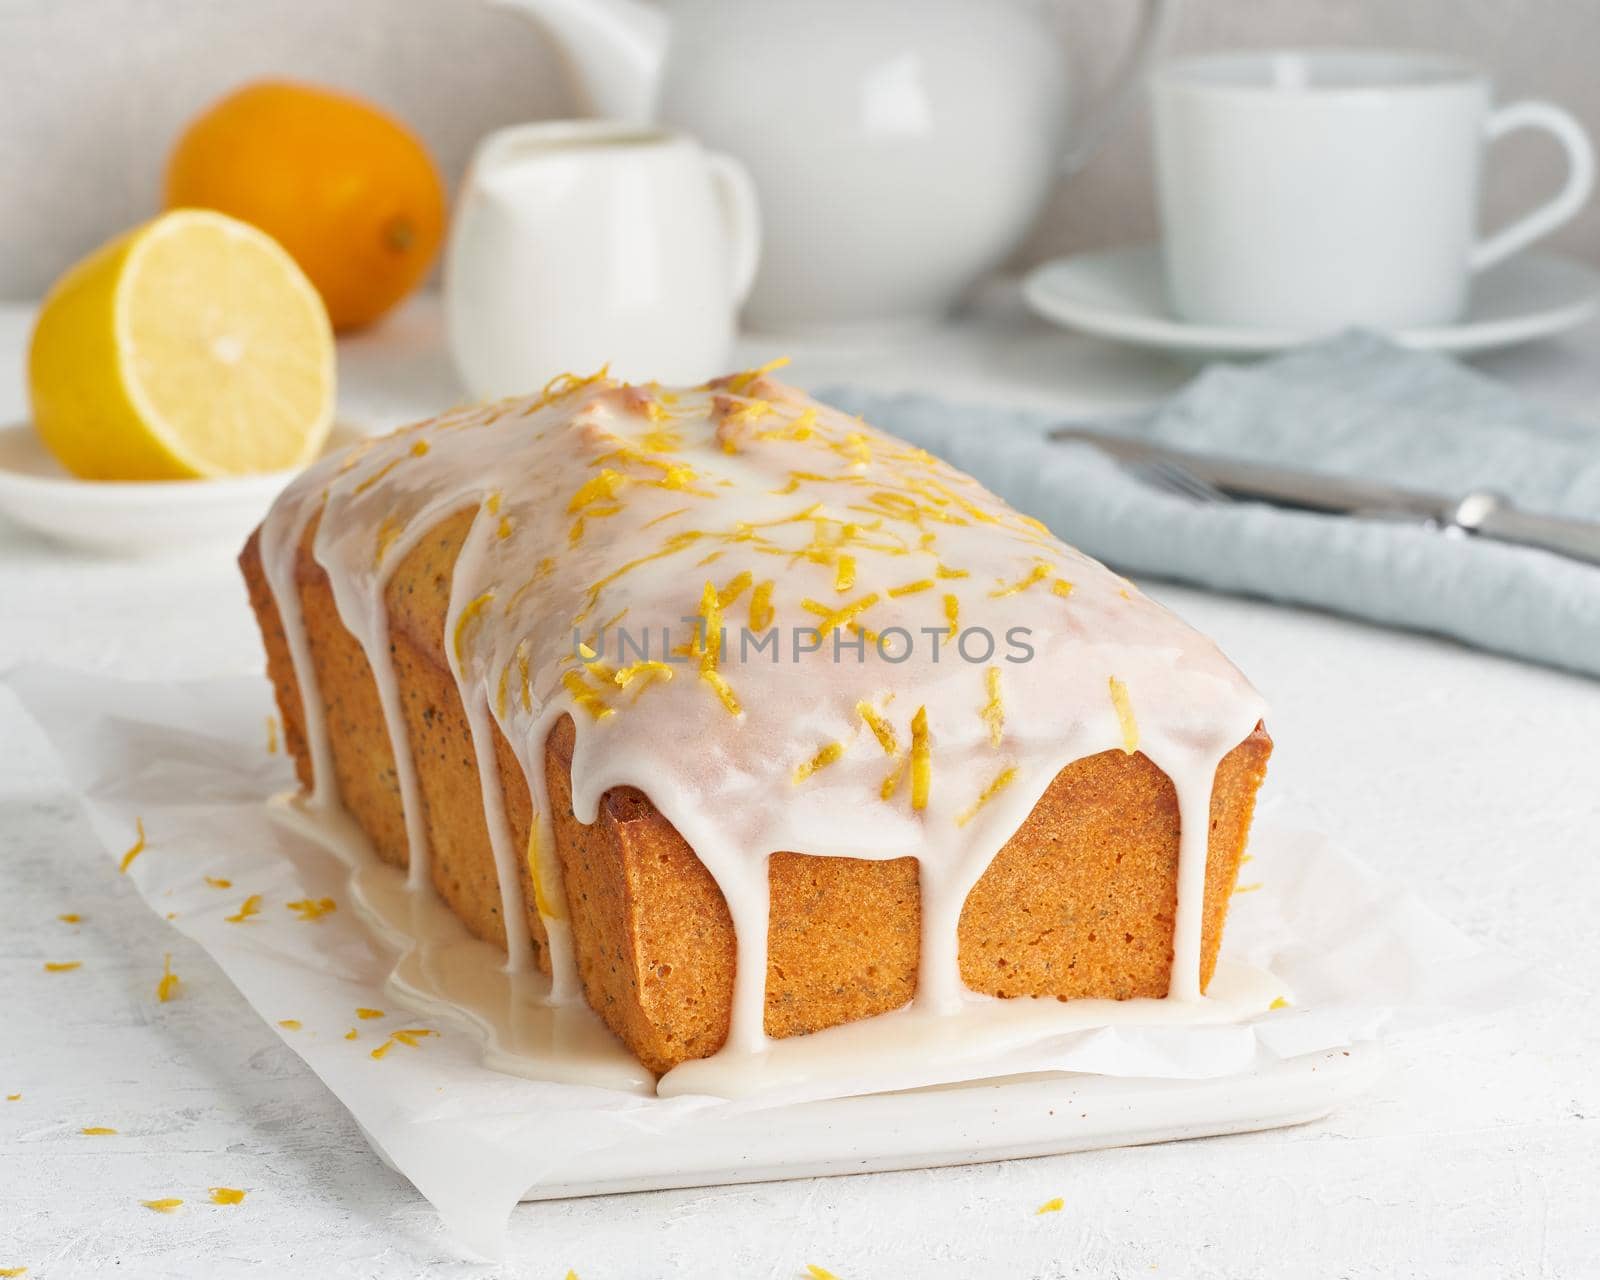 Lemon bread coated with sugar sweet. Cake with citrus, Whole loaf, side view, close up, vertical by NataBene